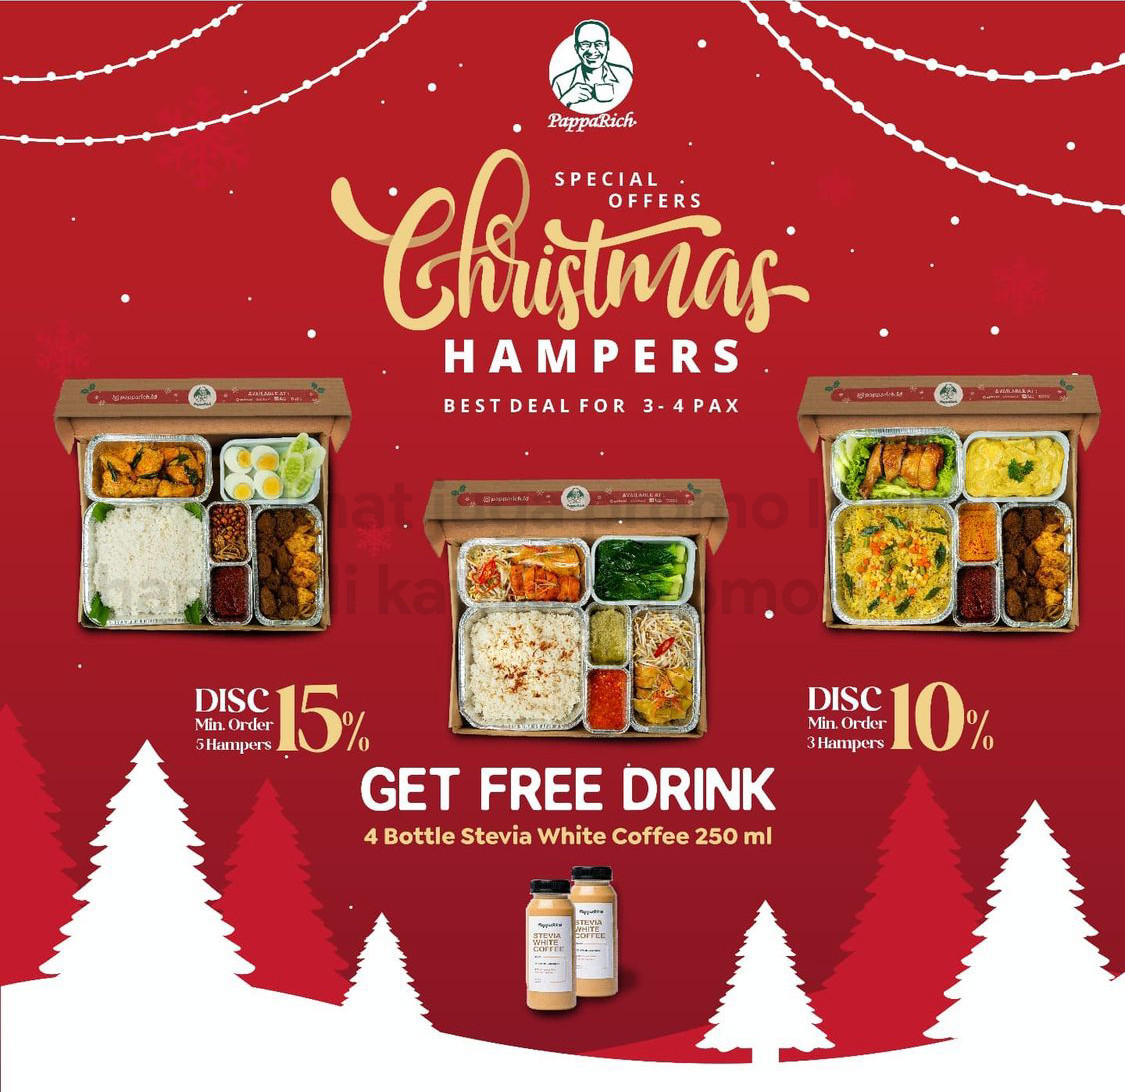 Promo PAPPARICH SPECIAL OFFERS CHRISTMAS HAMPERS FREE DRINK 4 Bottle Stevia White Coffee 